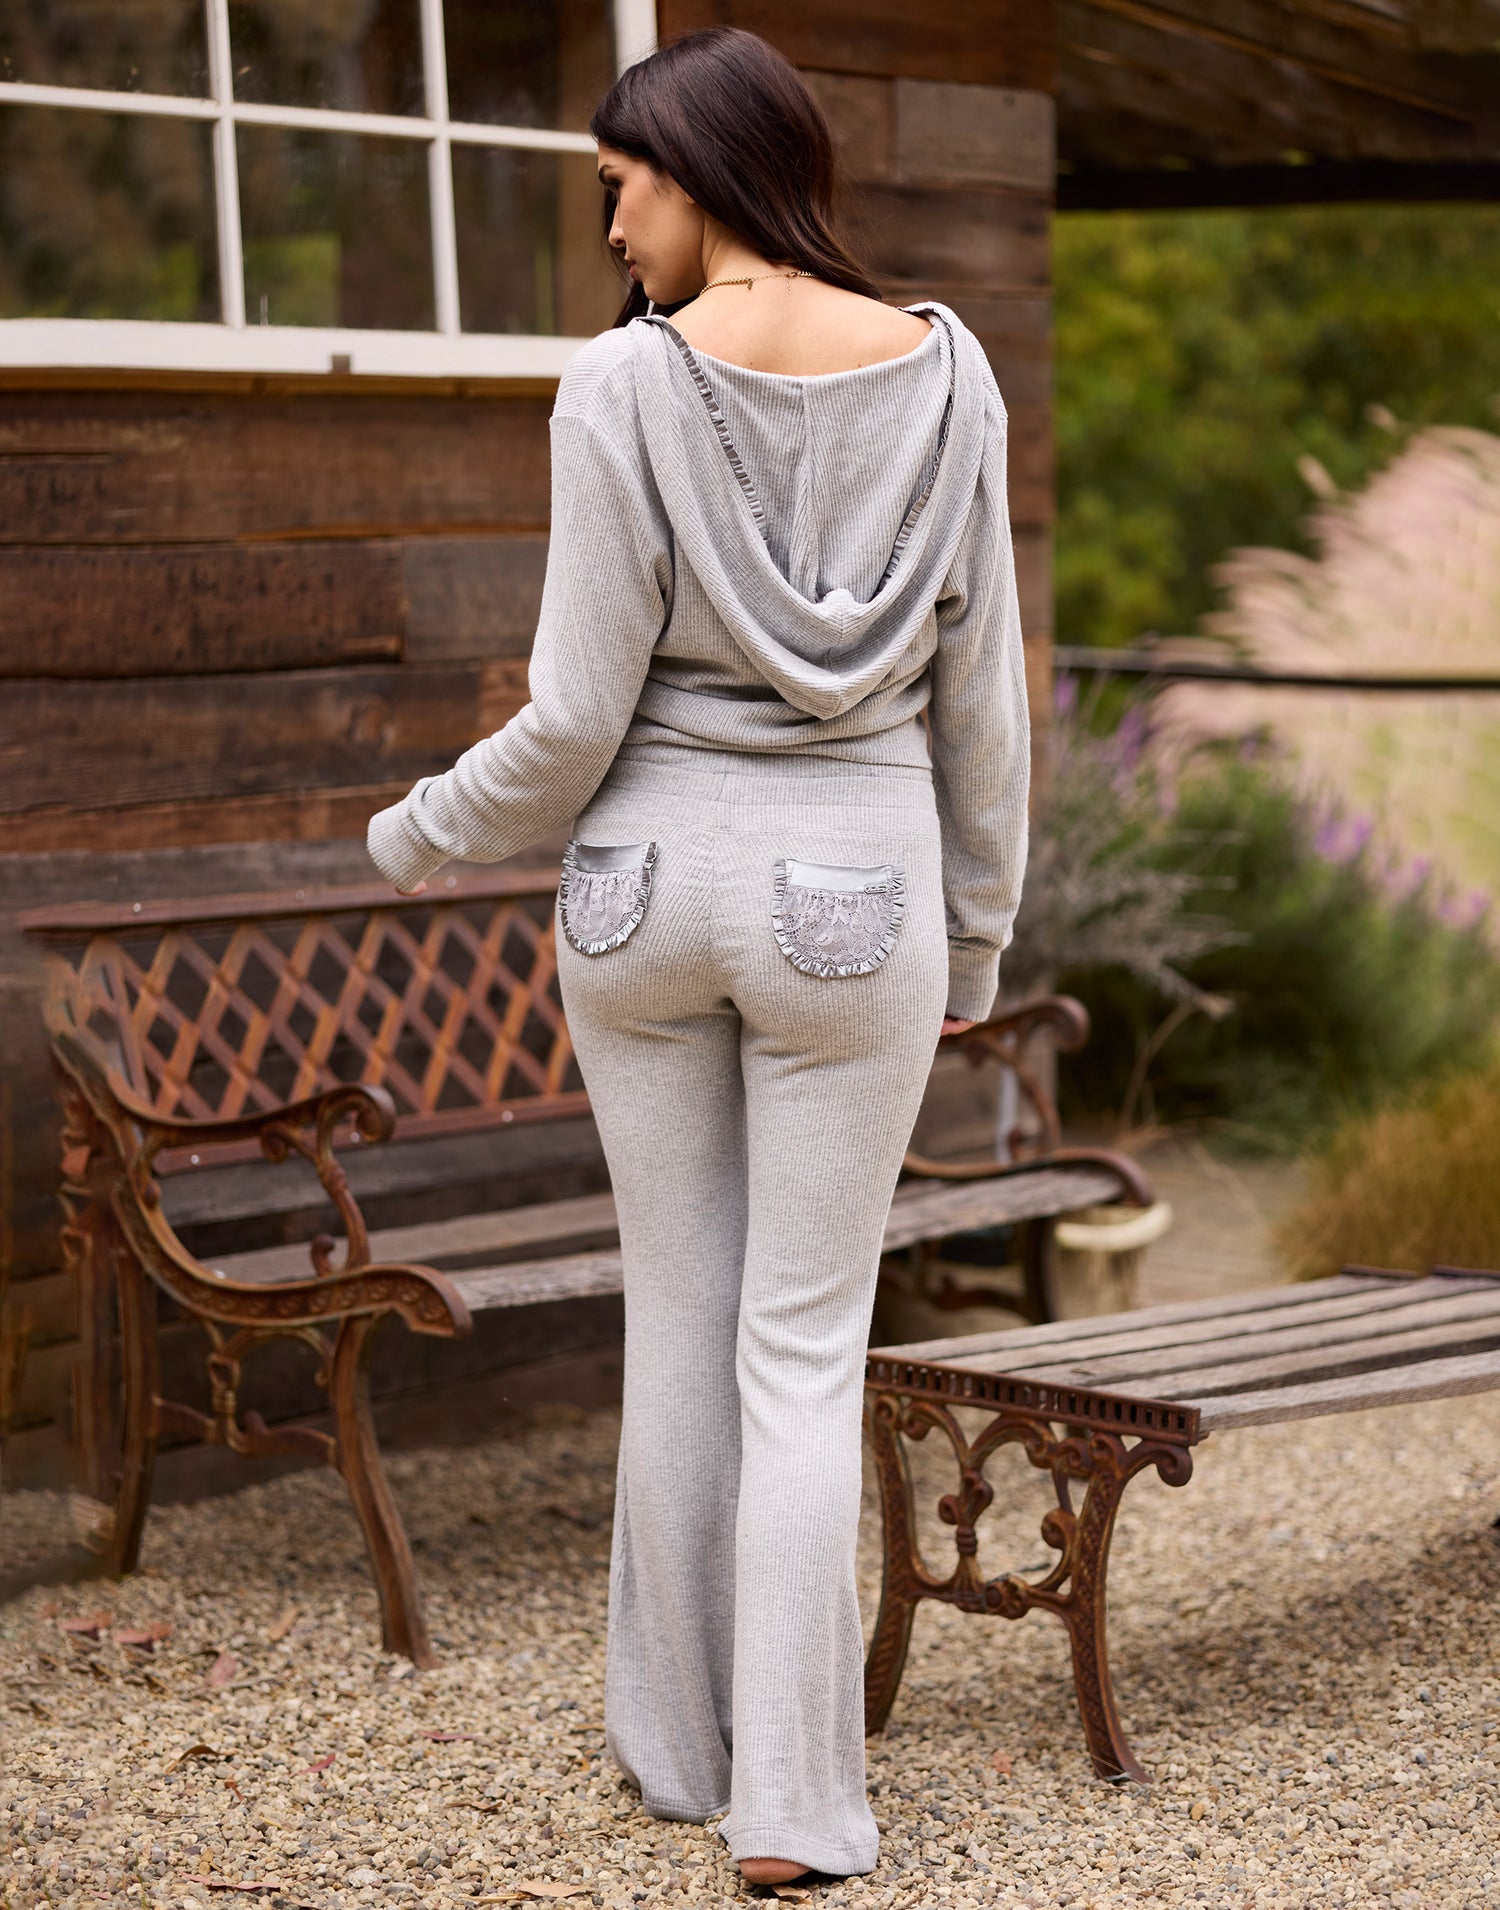 Bunny Booty Lounge Pant in Smokey Mountain - Back View / Resort 2023 Campaign 